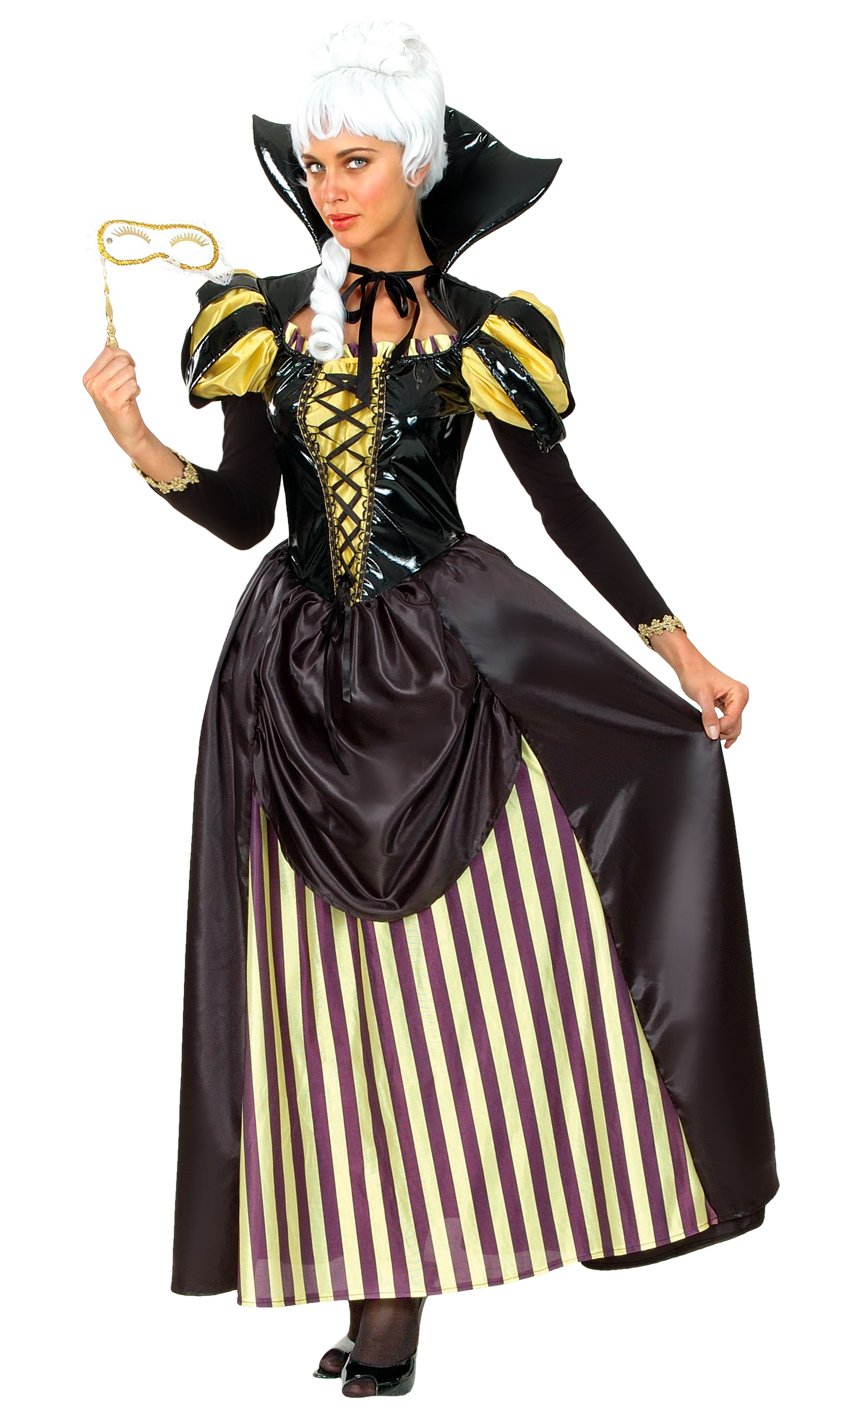 Costume-marquise-f34---grandes-tailles-xl-xxl